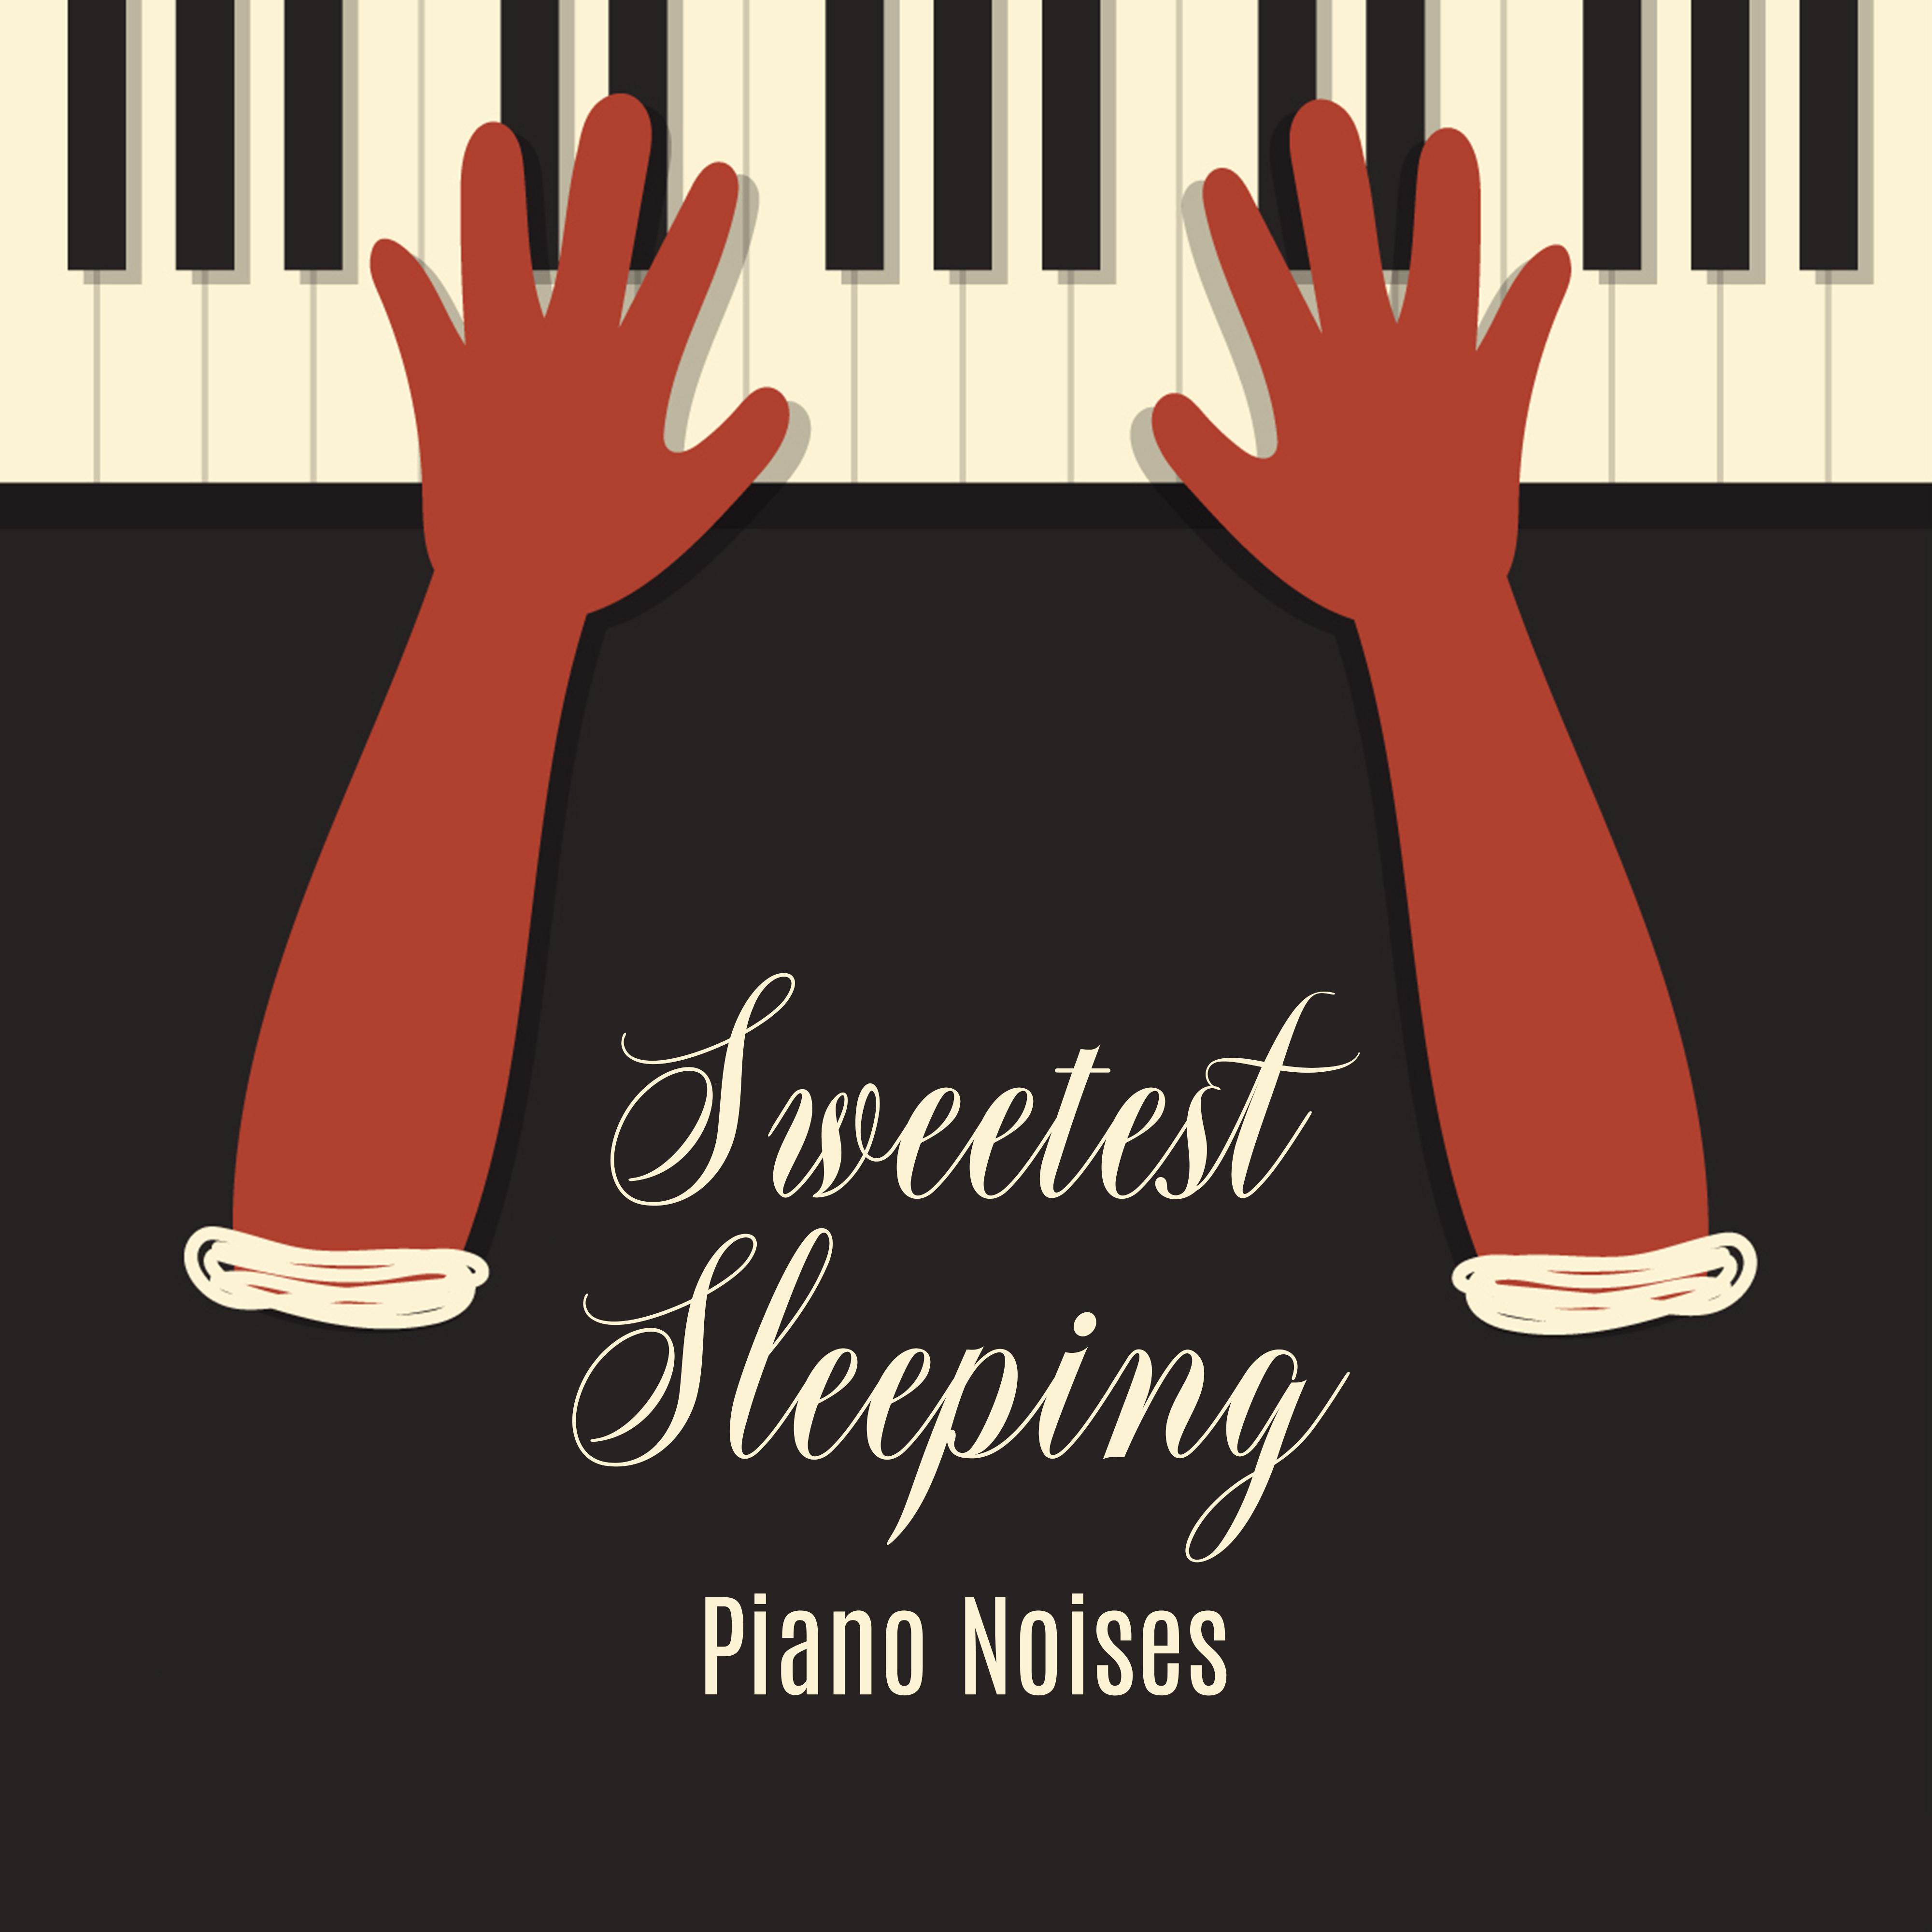 Sweetest Sleeping Piano Noises: 2019 Piano Jazz Music for Sleep, Total Relaxation, Calming Down & Full Restore Your Vital Energy